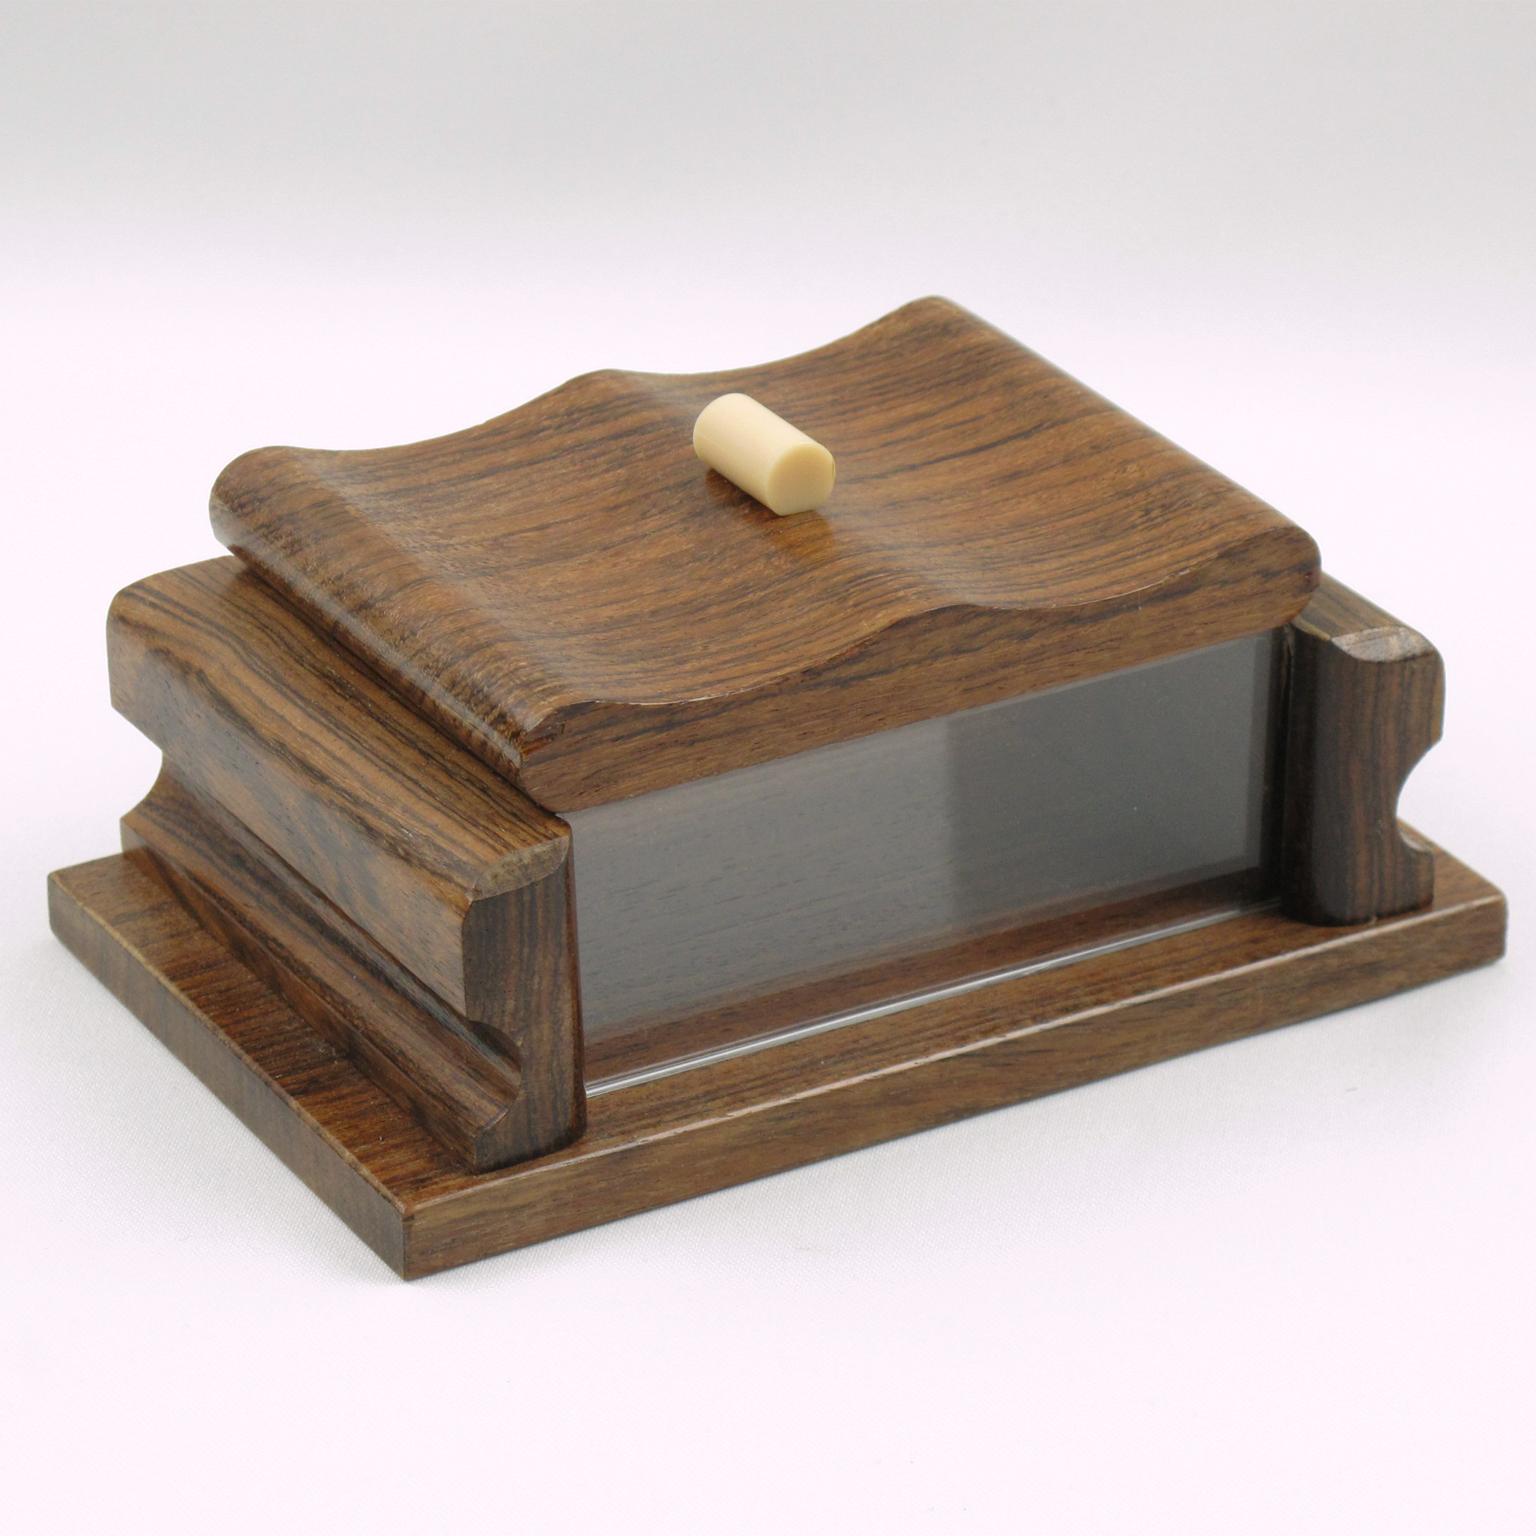 This elegant hand-carved modernist Art Deco decorative lidded box was crafted in France circa 1940. The rectangular shape has solid wood and crystal clear Lucite on the sides and is ornate with an off-white Galalith stick handle. The original